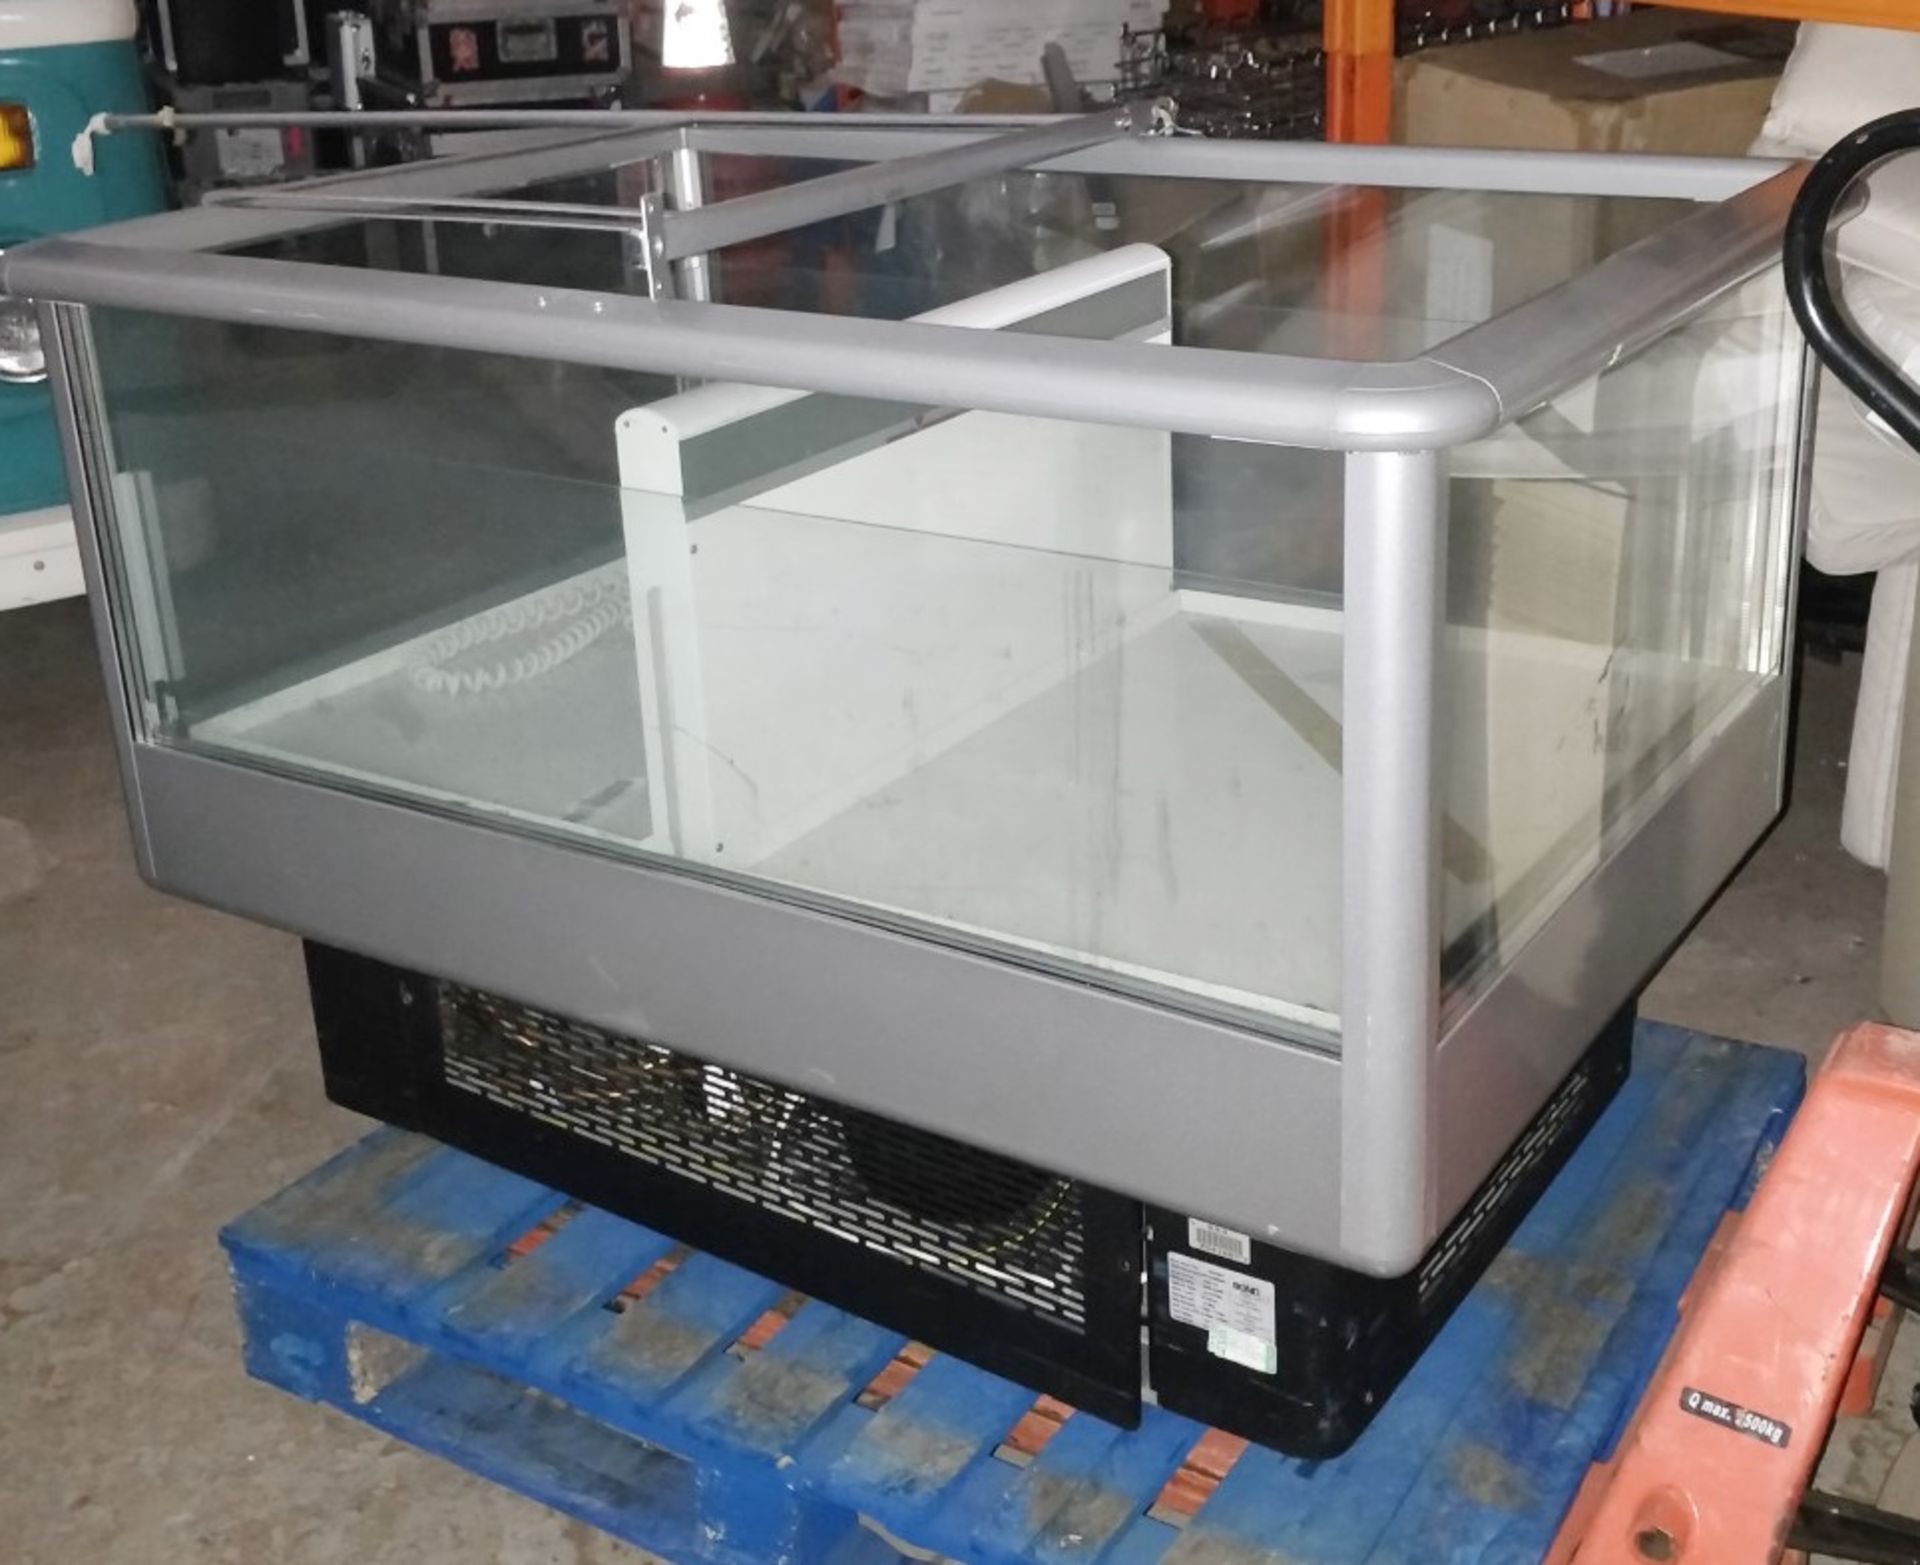 1 x Carrier COG33 Chiller Island For Promotional Sales - 240v - Size H99 x W140 x D95 cms - Recently - Image 5 of 5